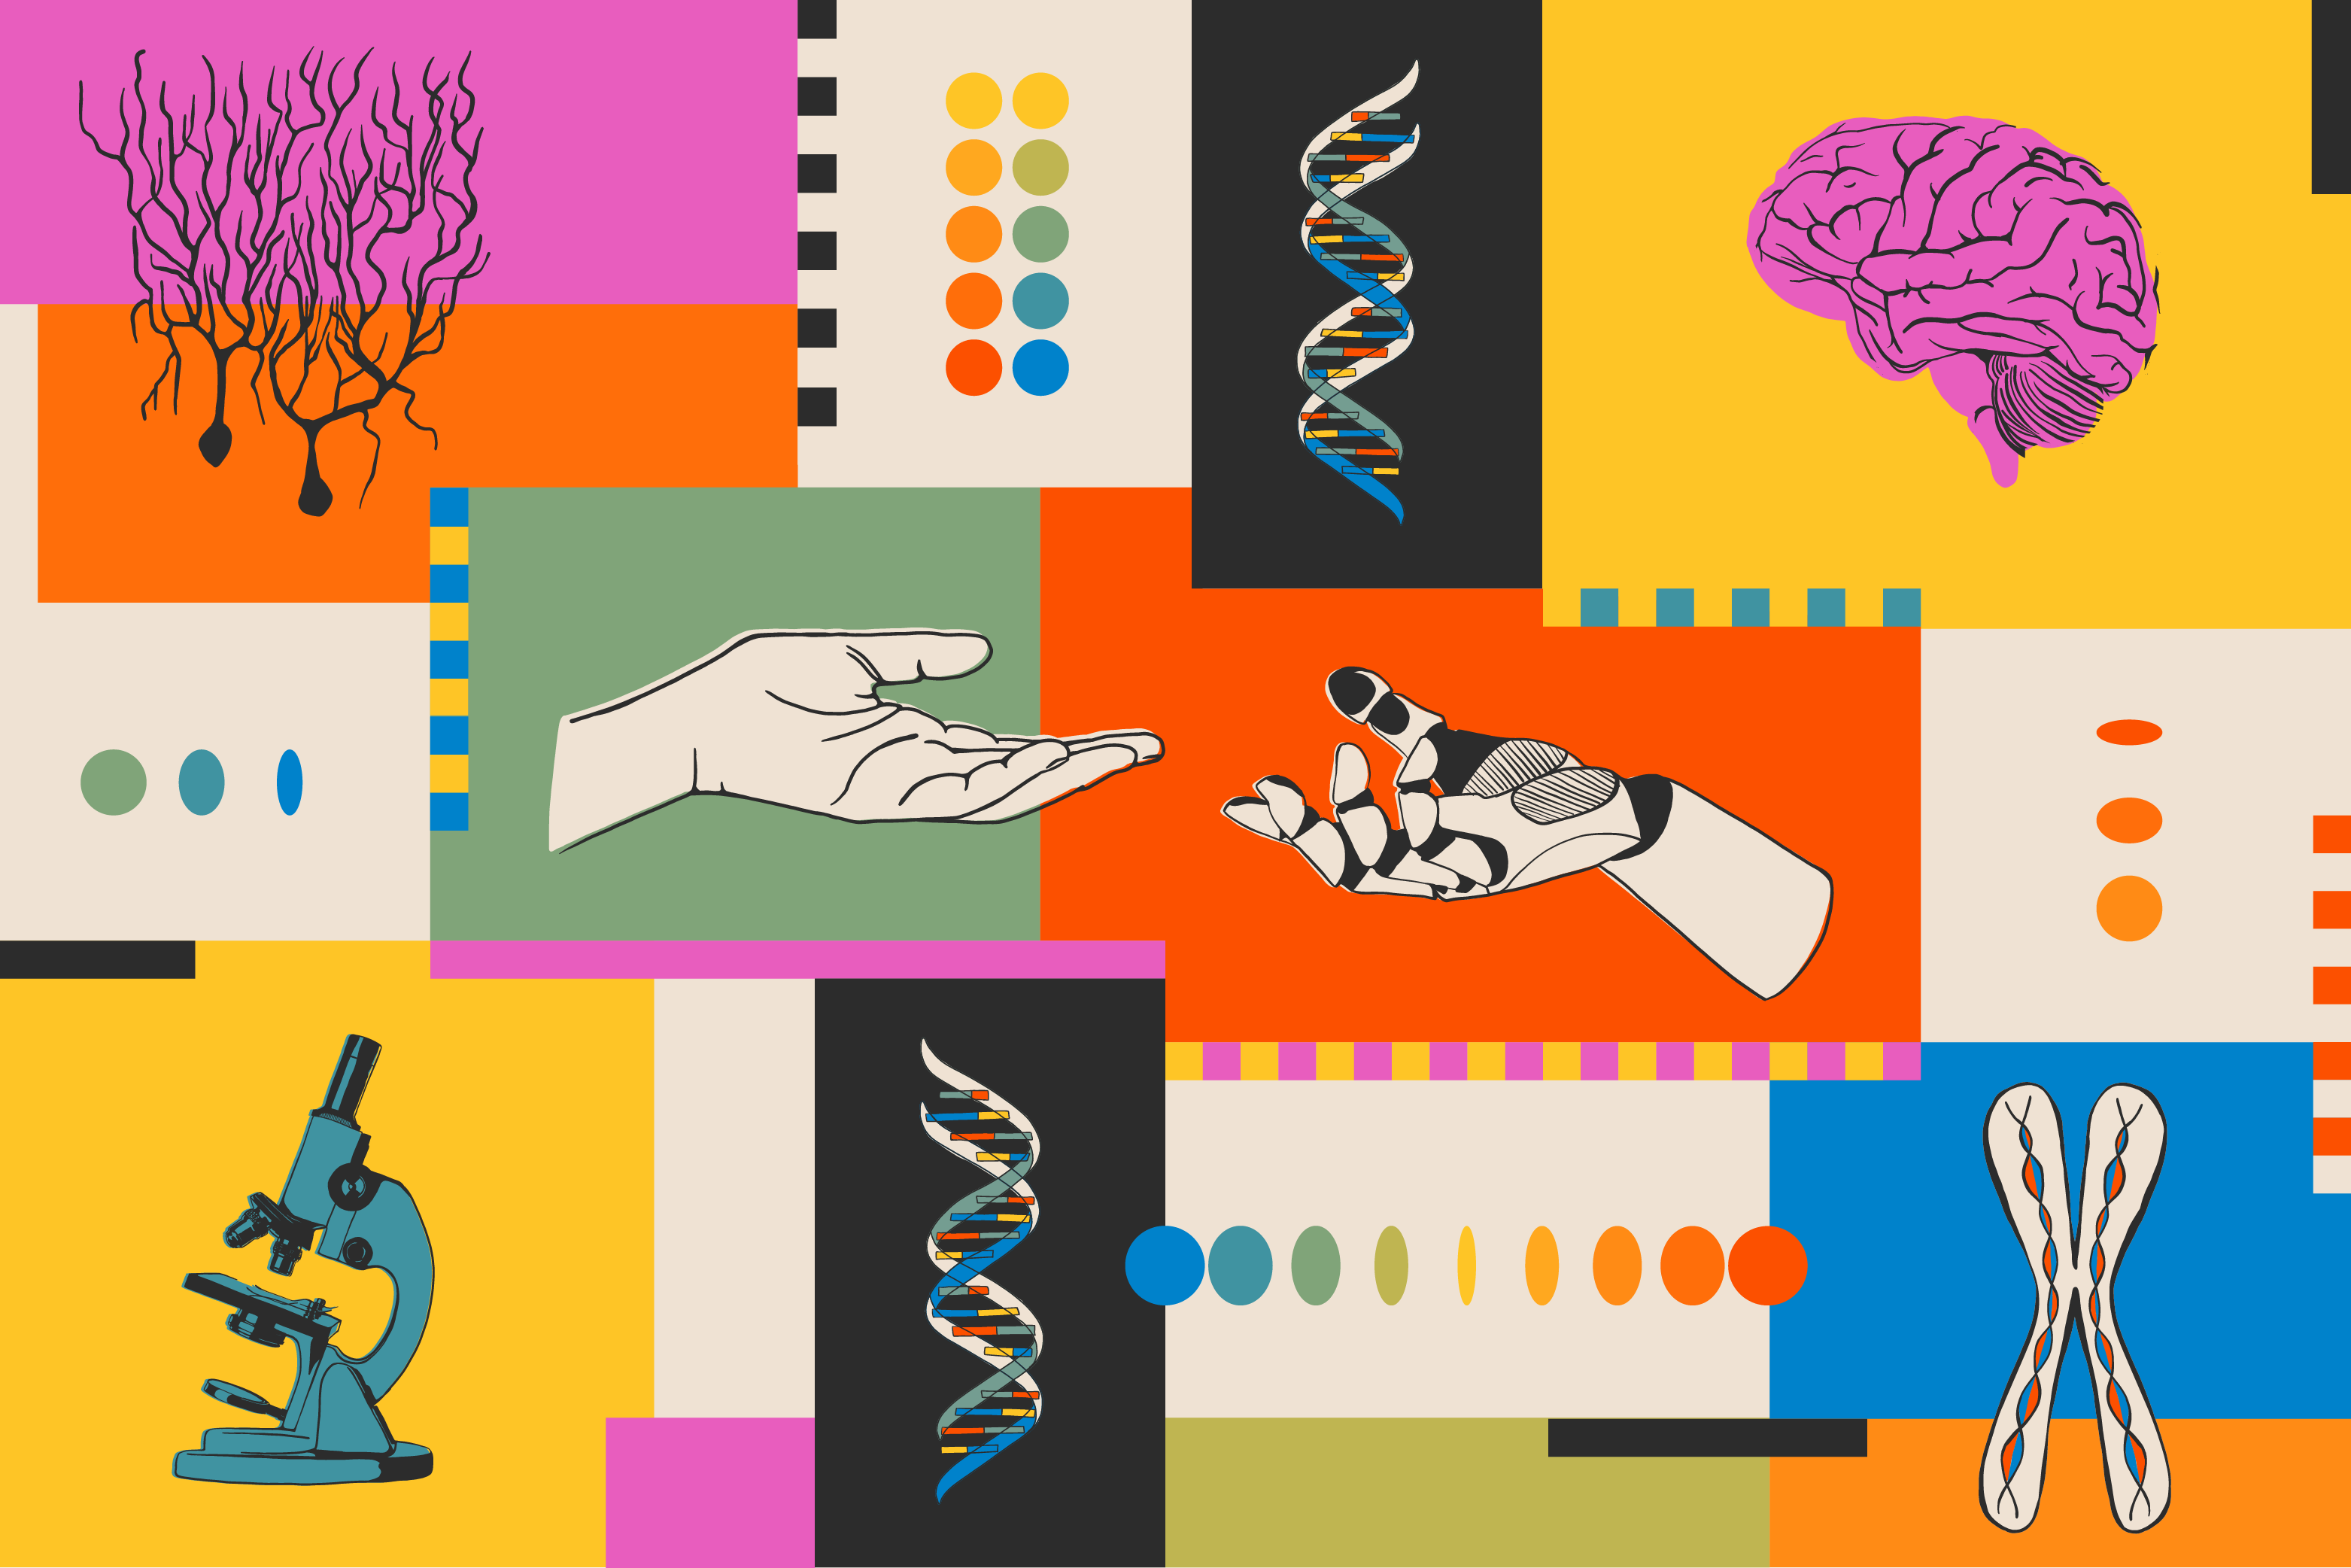 A brightly colored graphic shows DNA strands, neurons, and a robot hand reaching out for a human hand